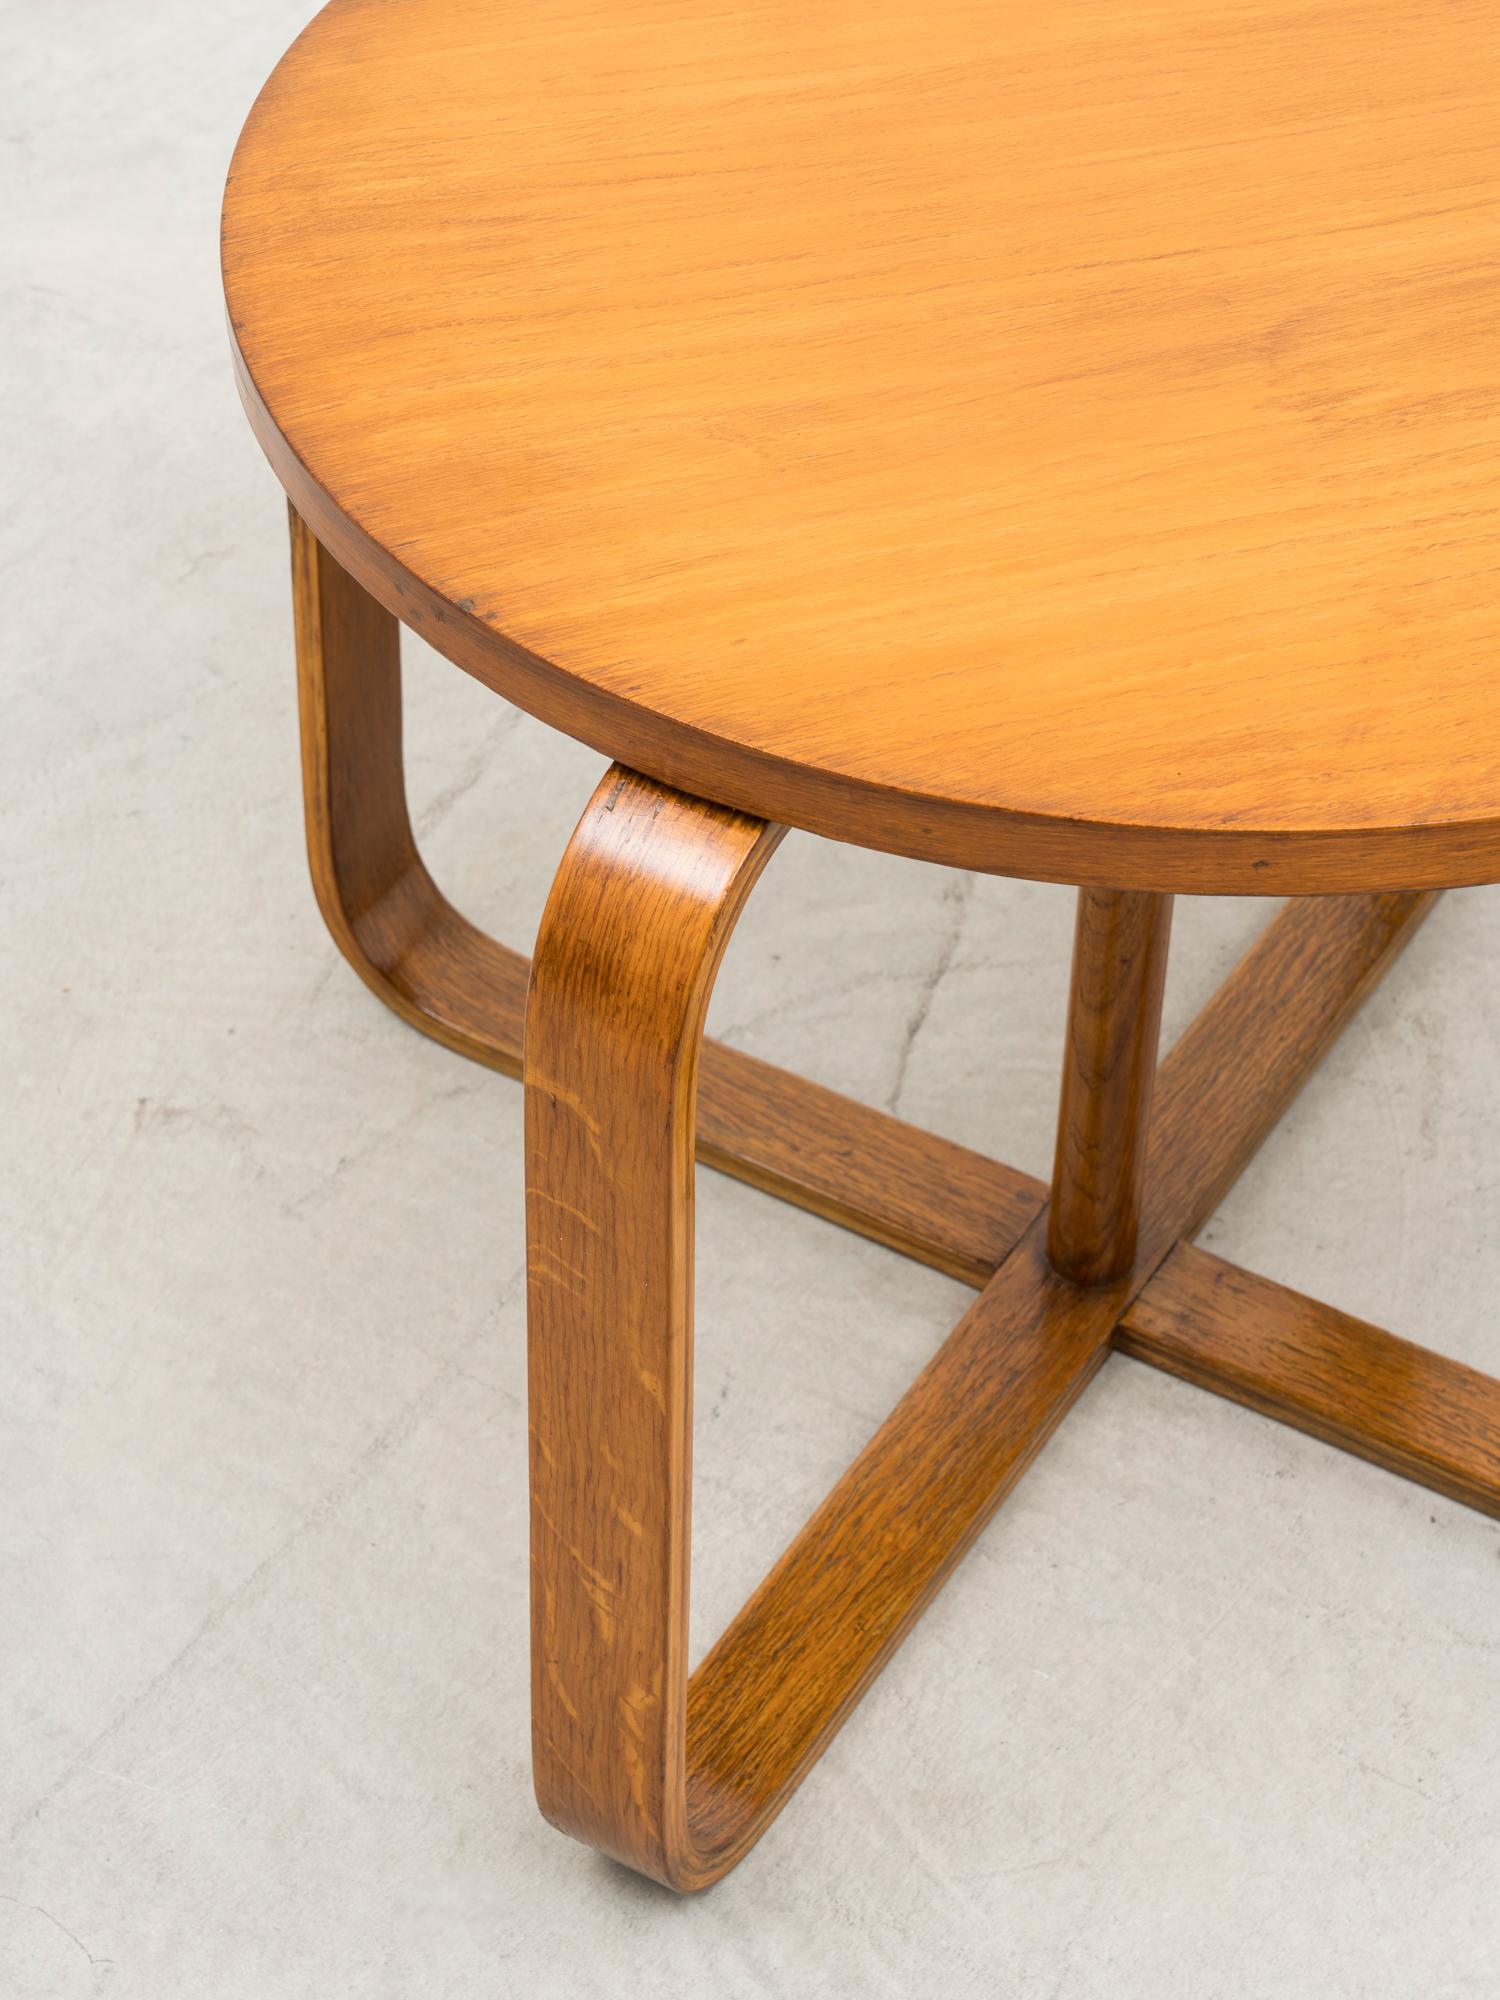 Beech Rationalist Wooden Coffe Table by Giuseppe Pagano Pogatschnig for Maggioni 1940s For Sale